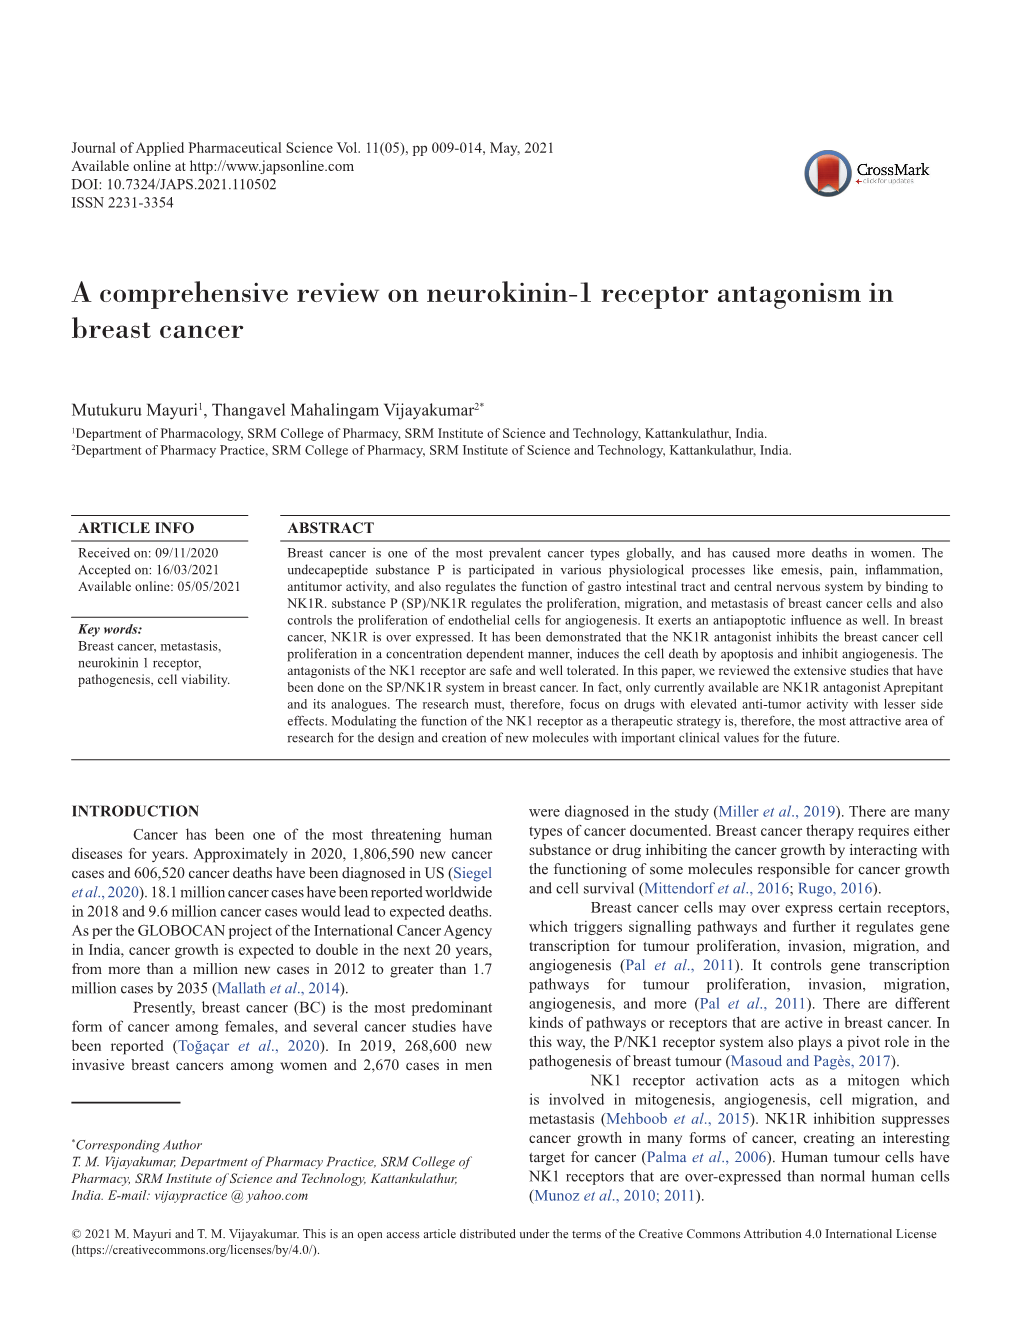 A Comprehensive Review on Neurokinin-1 Receptor Antagonism in Breast Cancer